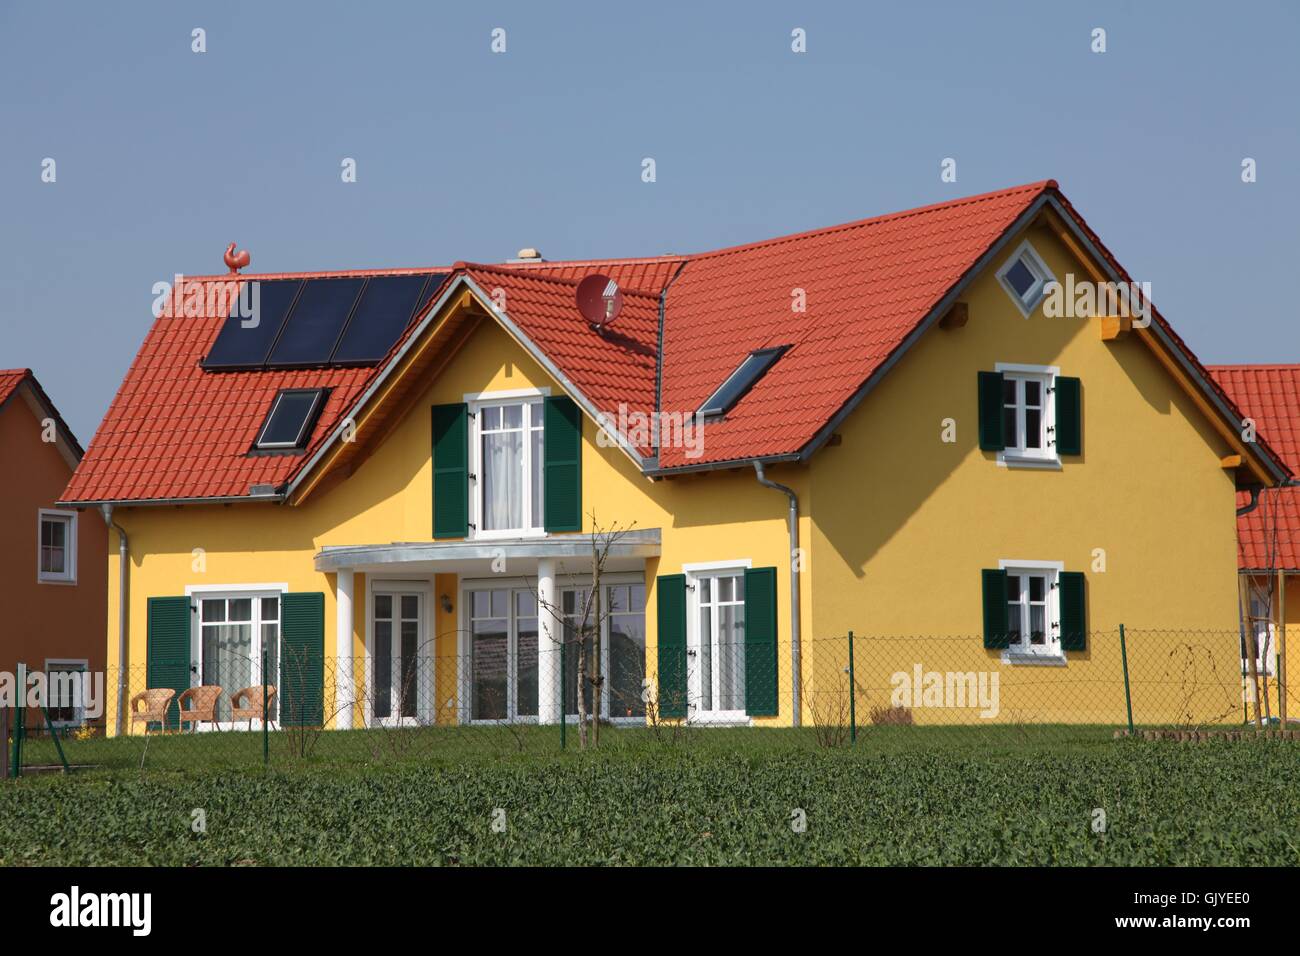 yellow new detached house Stock Photo